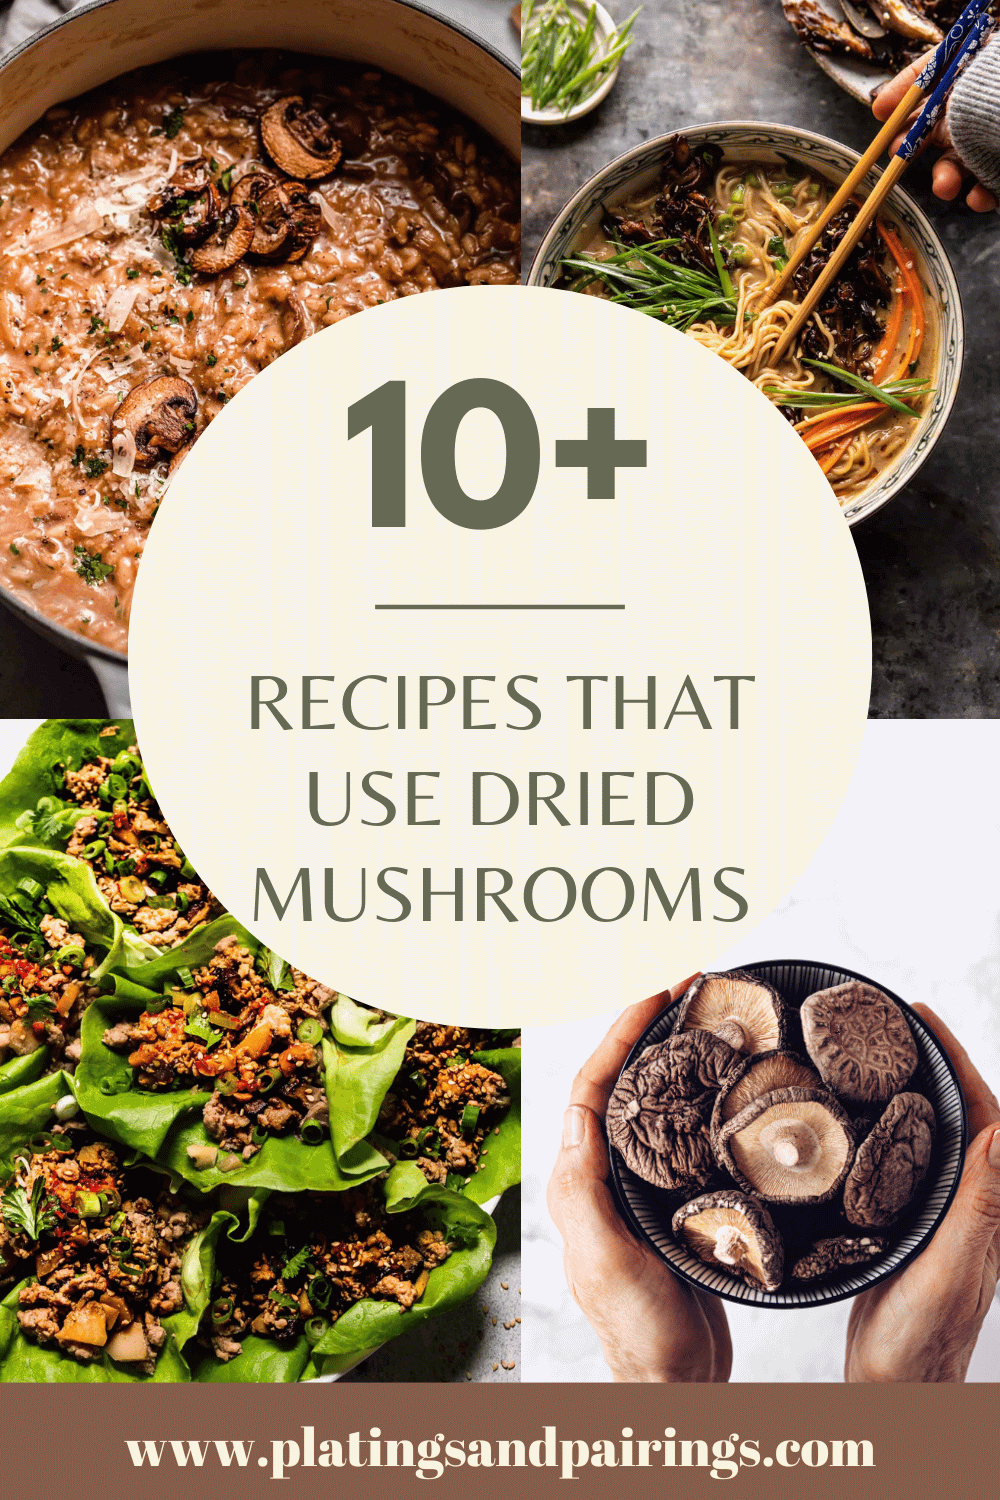 Collage of dried mushroom recipes with text overlay.